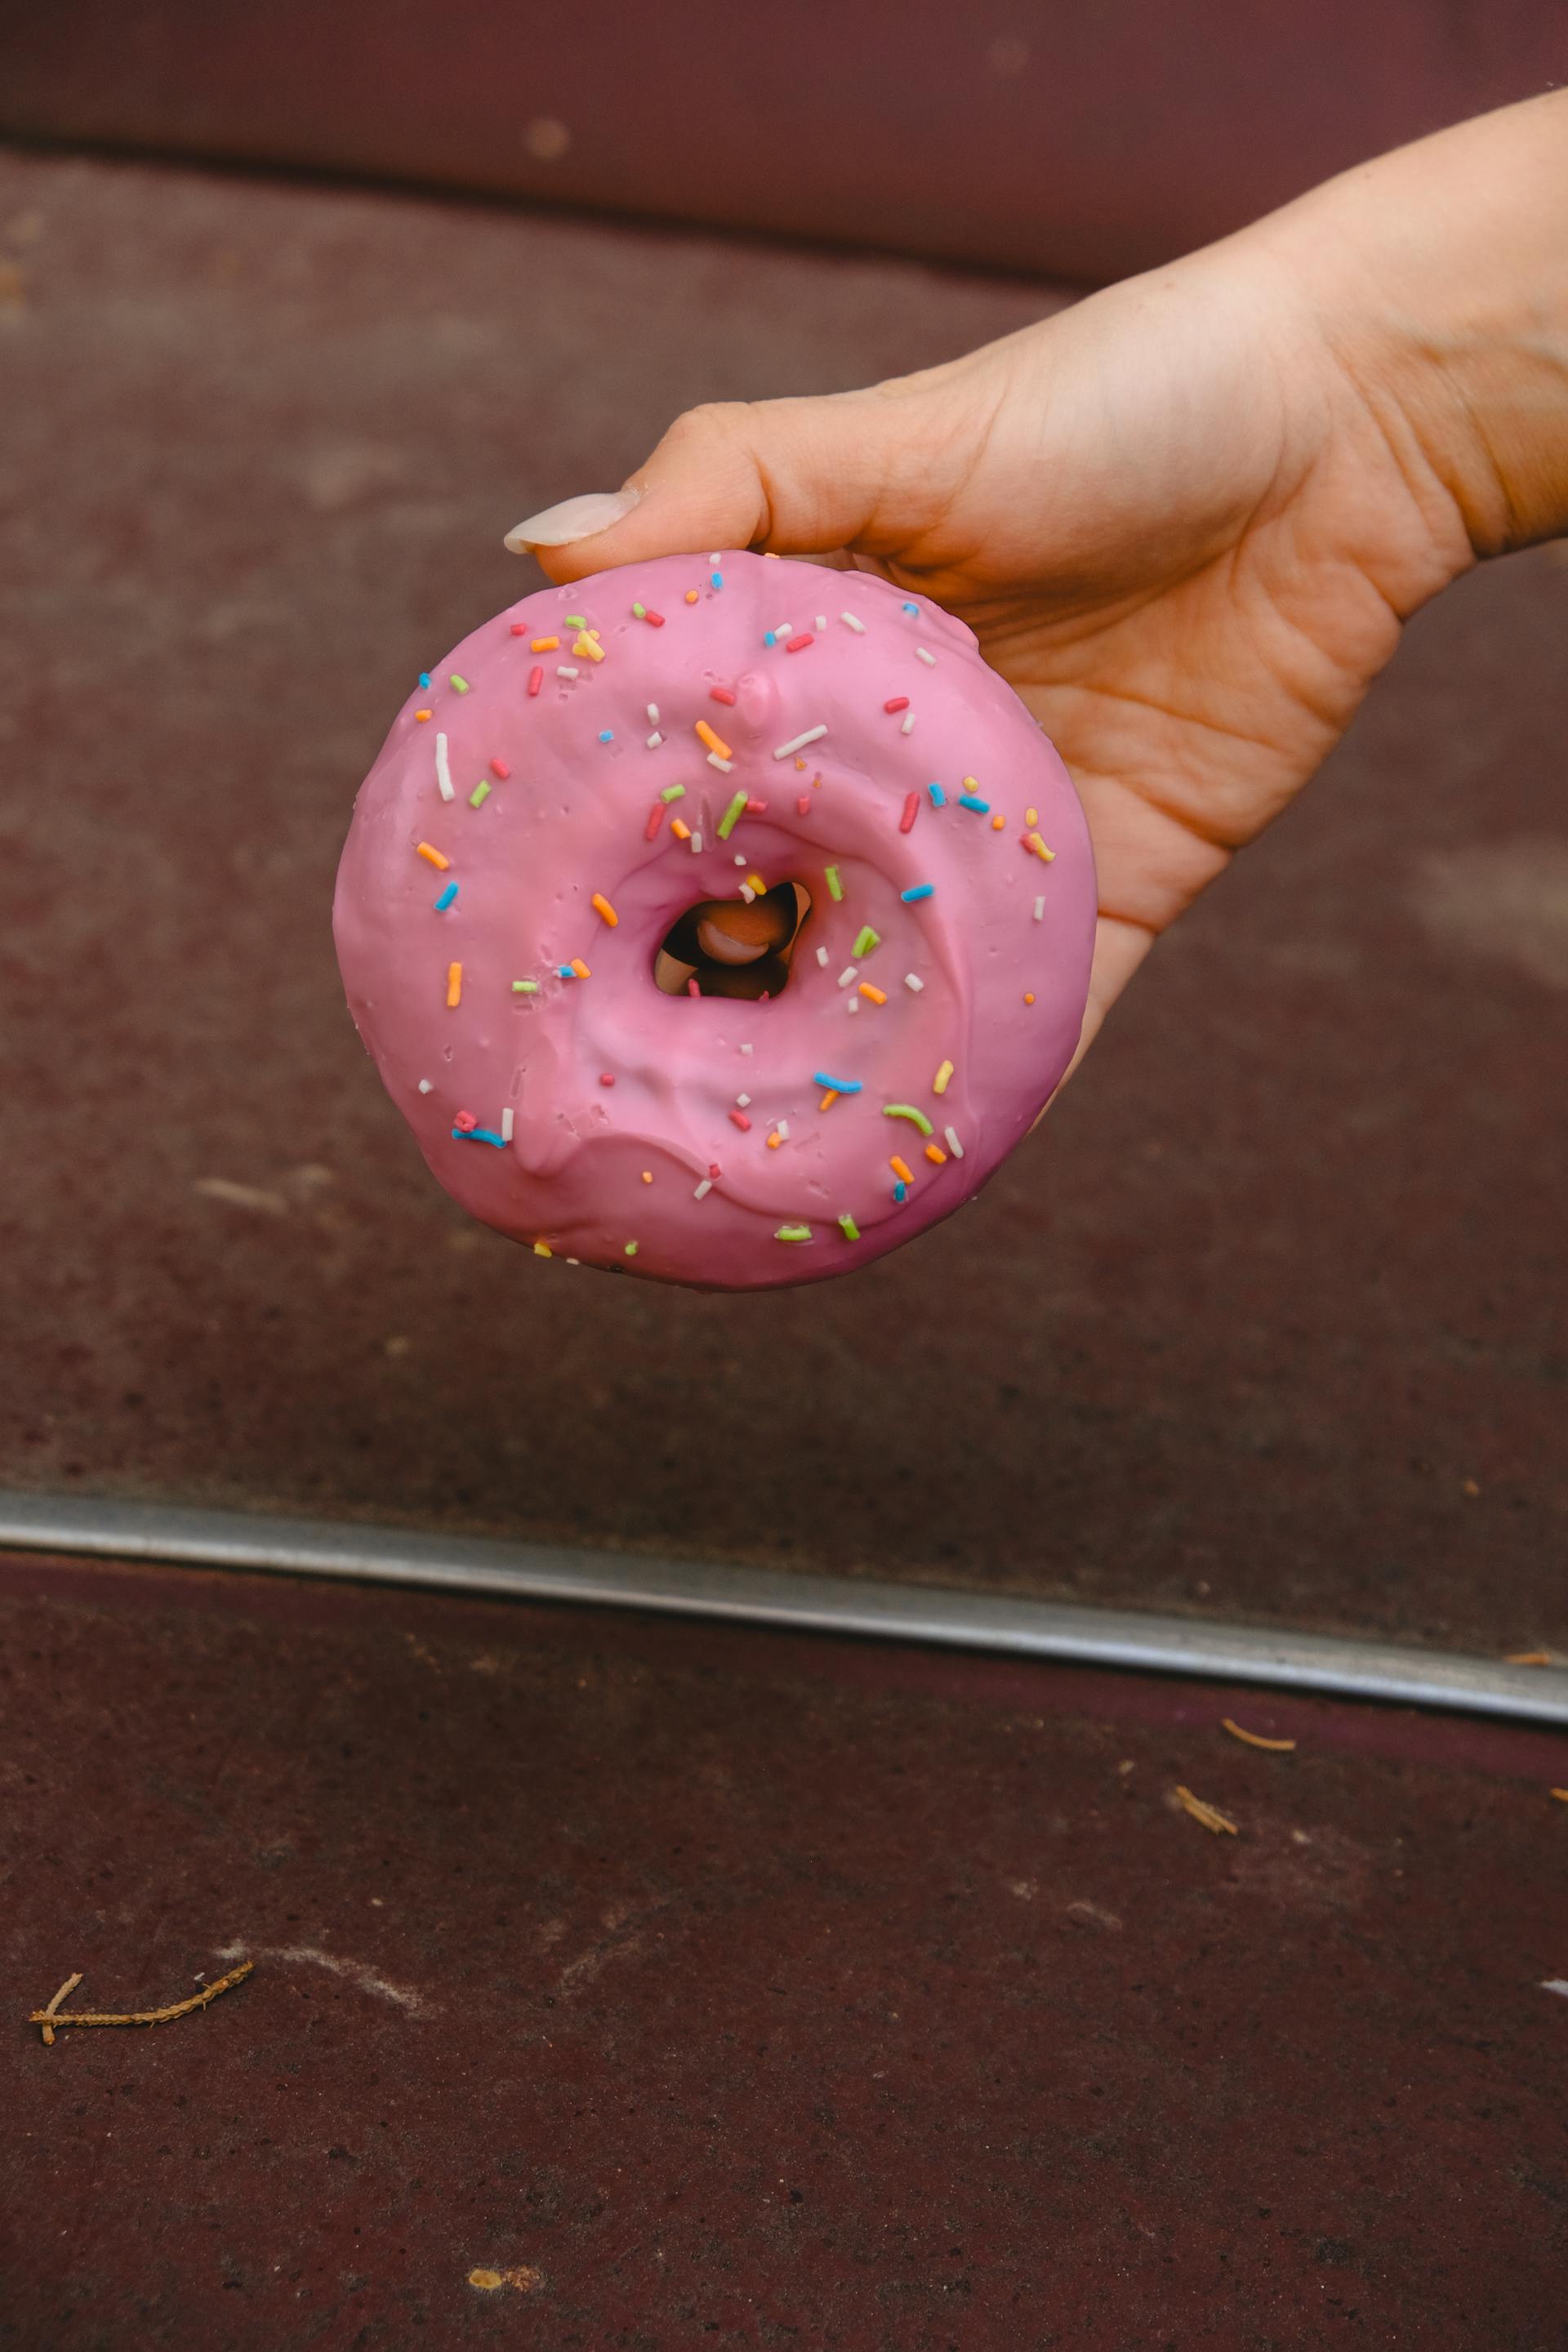 A person holding a donut | Source: Pexels